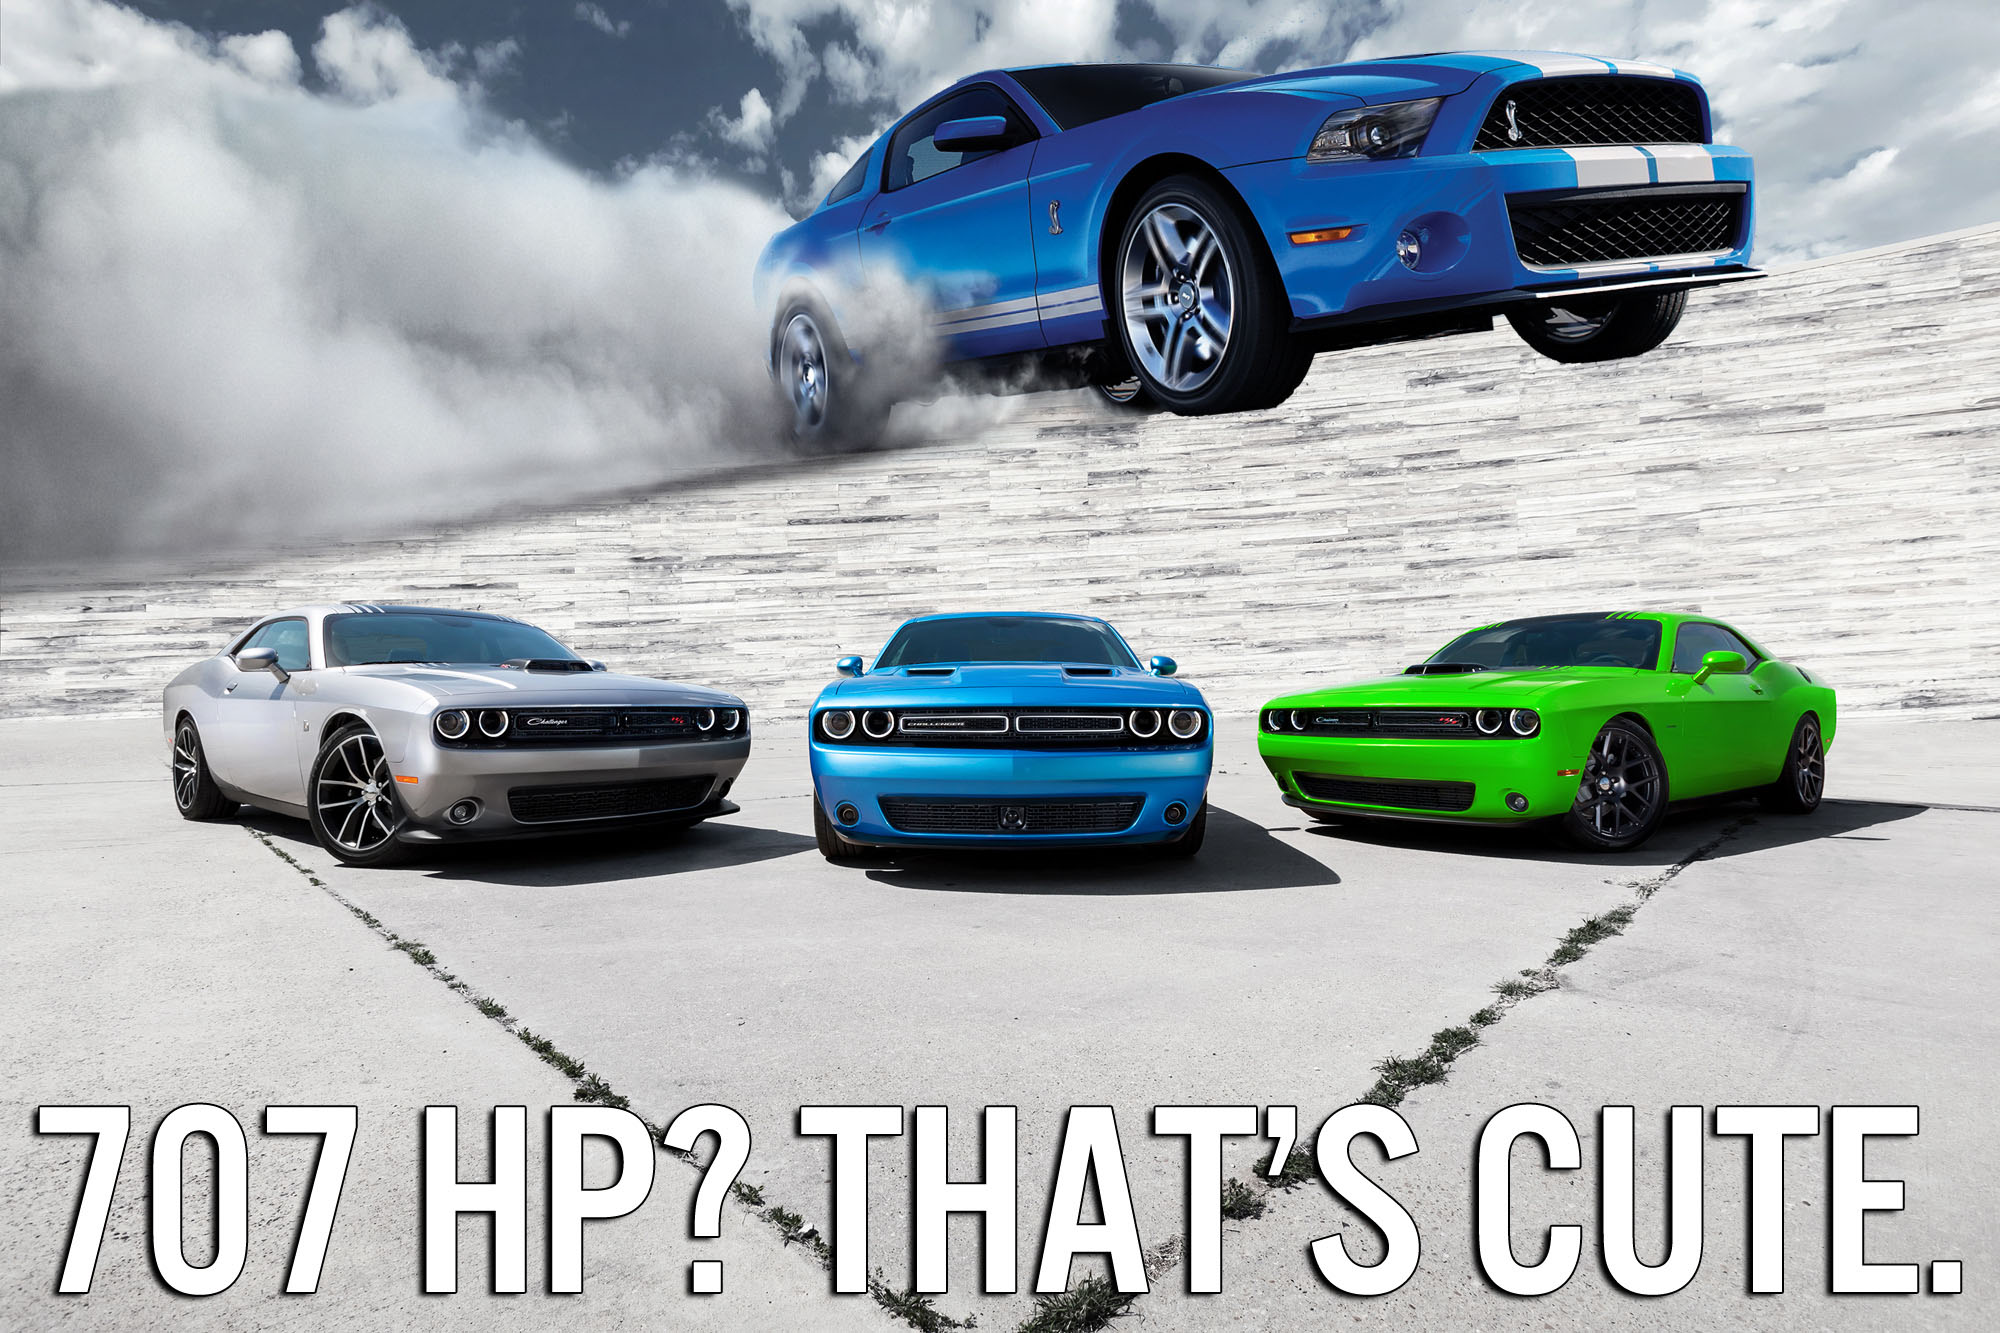 Twelve Pro-Ford and Pro-Mustang Memes - Vote for Your Favorite - The Mustang  Source